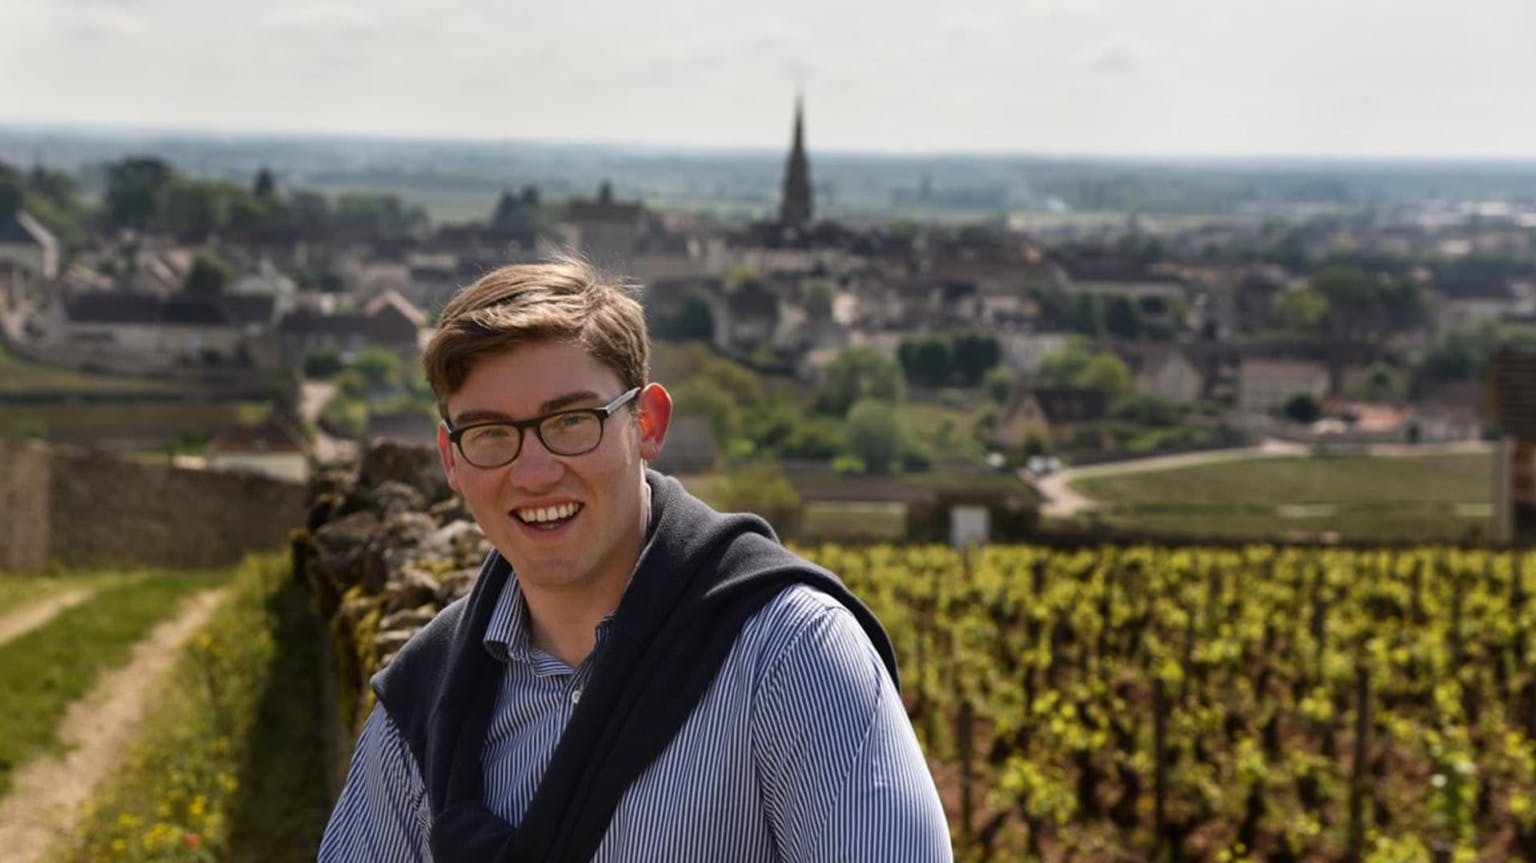 The true stars of Burgundy according to The Wine Advocate's William Kelley 